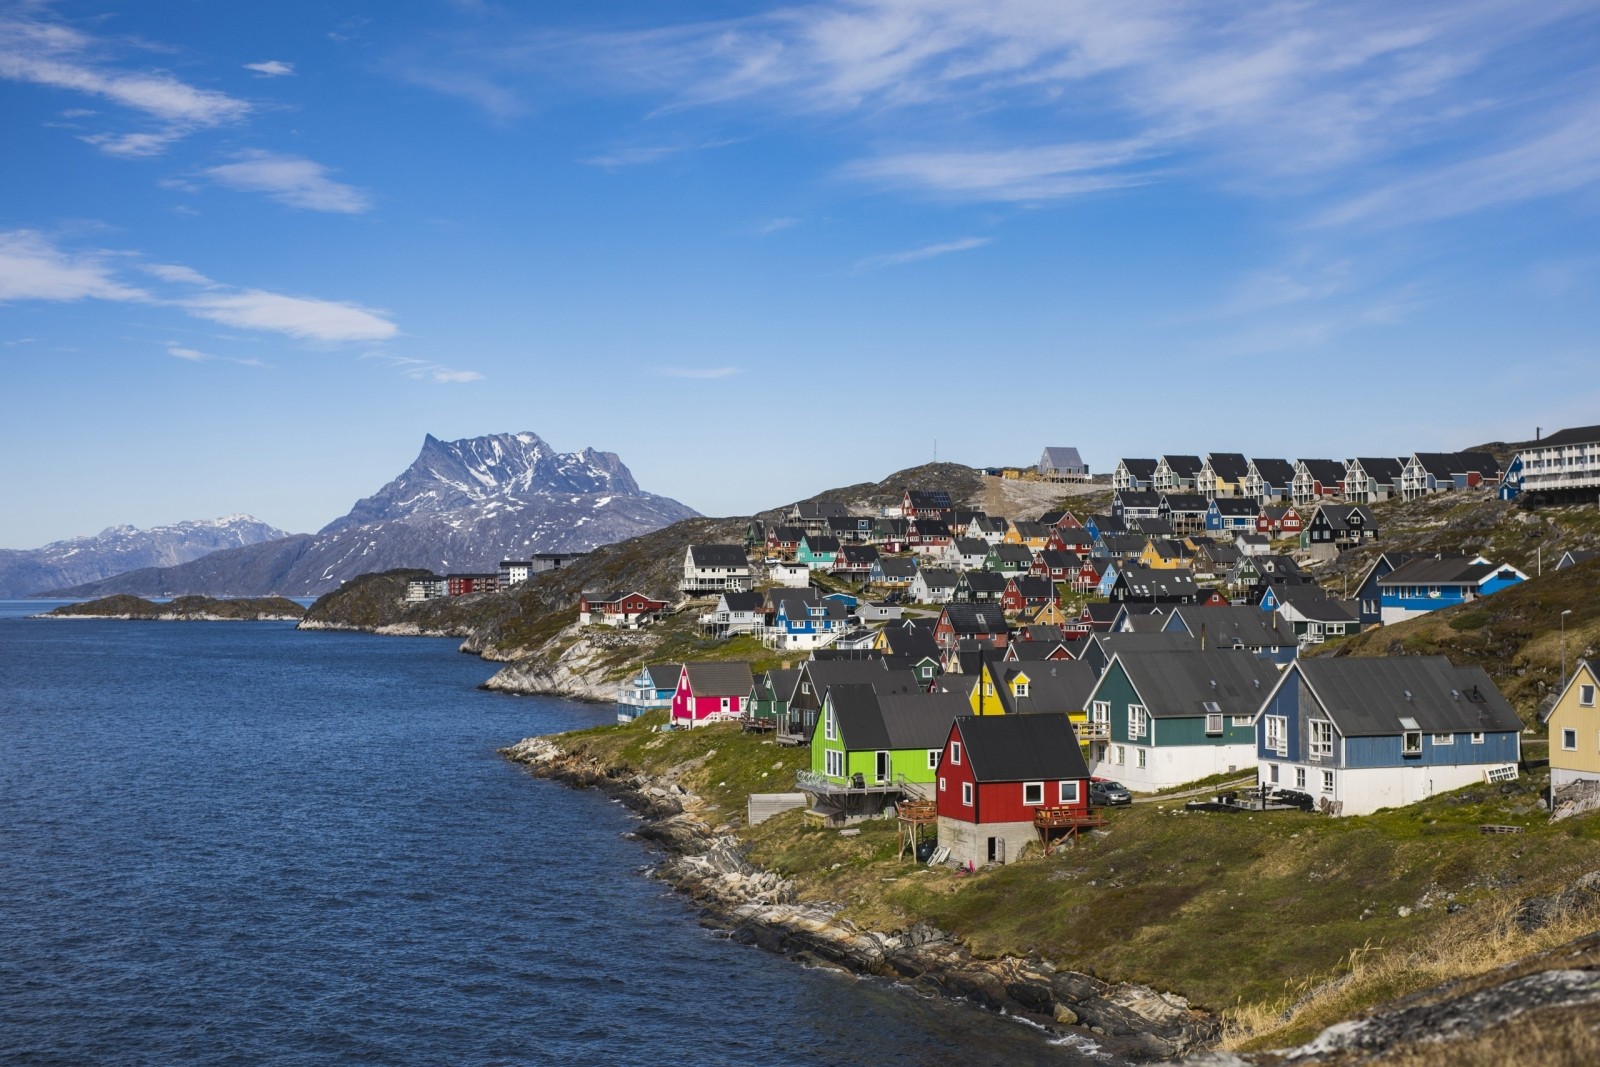 After-One of the famous viewpoint in Nuuk, the view from Myggedalen